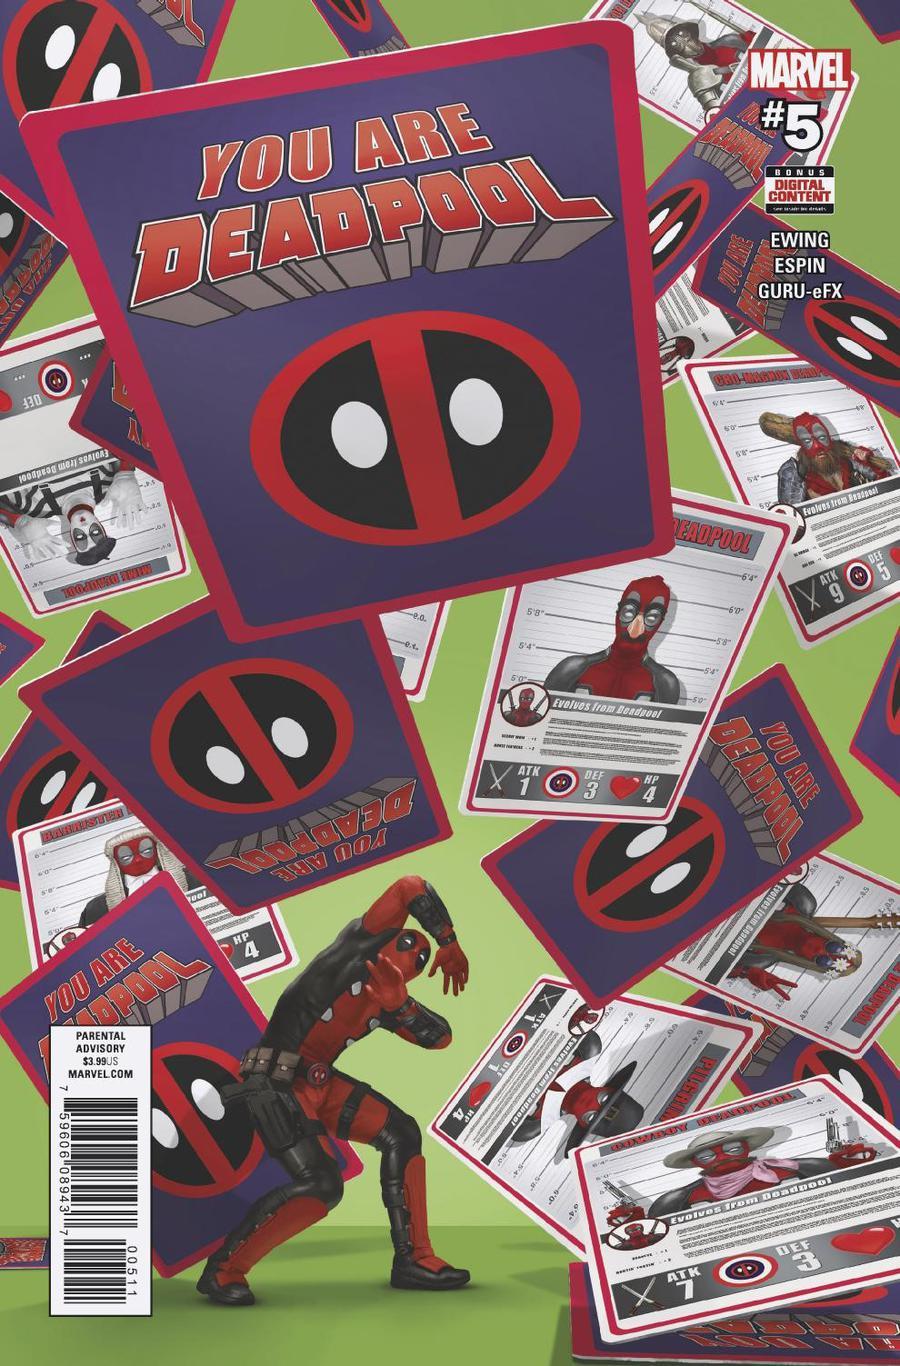 You Are Deadpool Vol. 1 #5